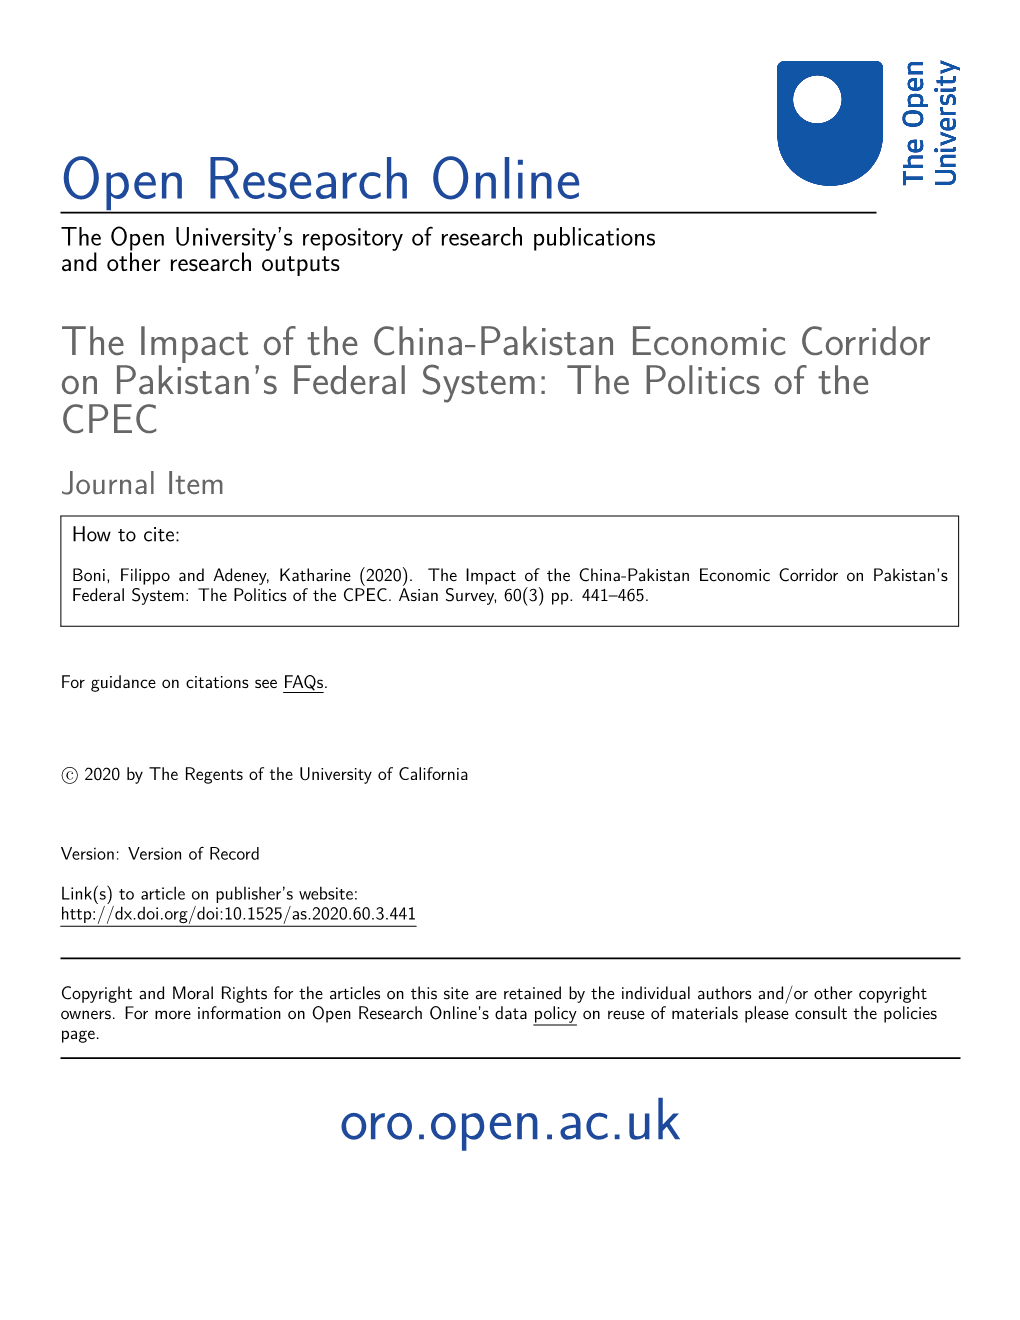 The Politics of the CPEC Journal Item